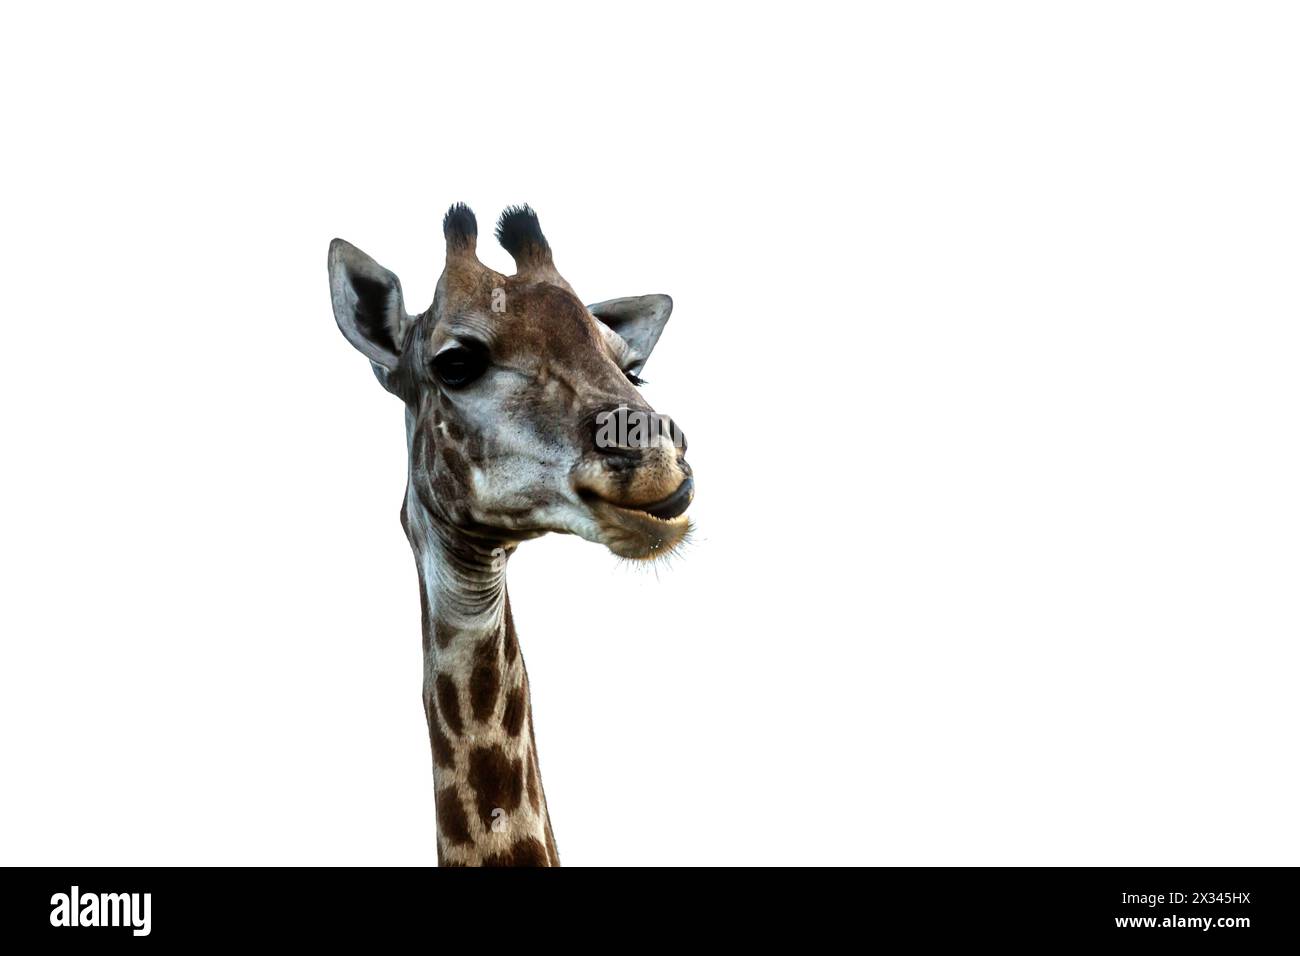 Giraffe funny portrait isolated in white background in Kruger National park, South Africa ; Specie Giraffa camelopardalis family of Giraffidae Stock Photo